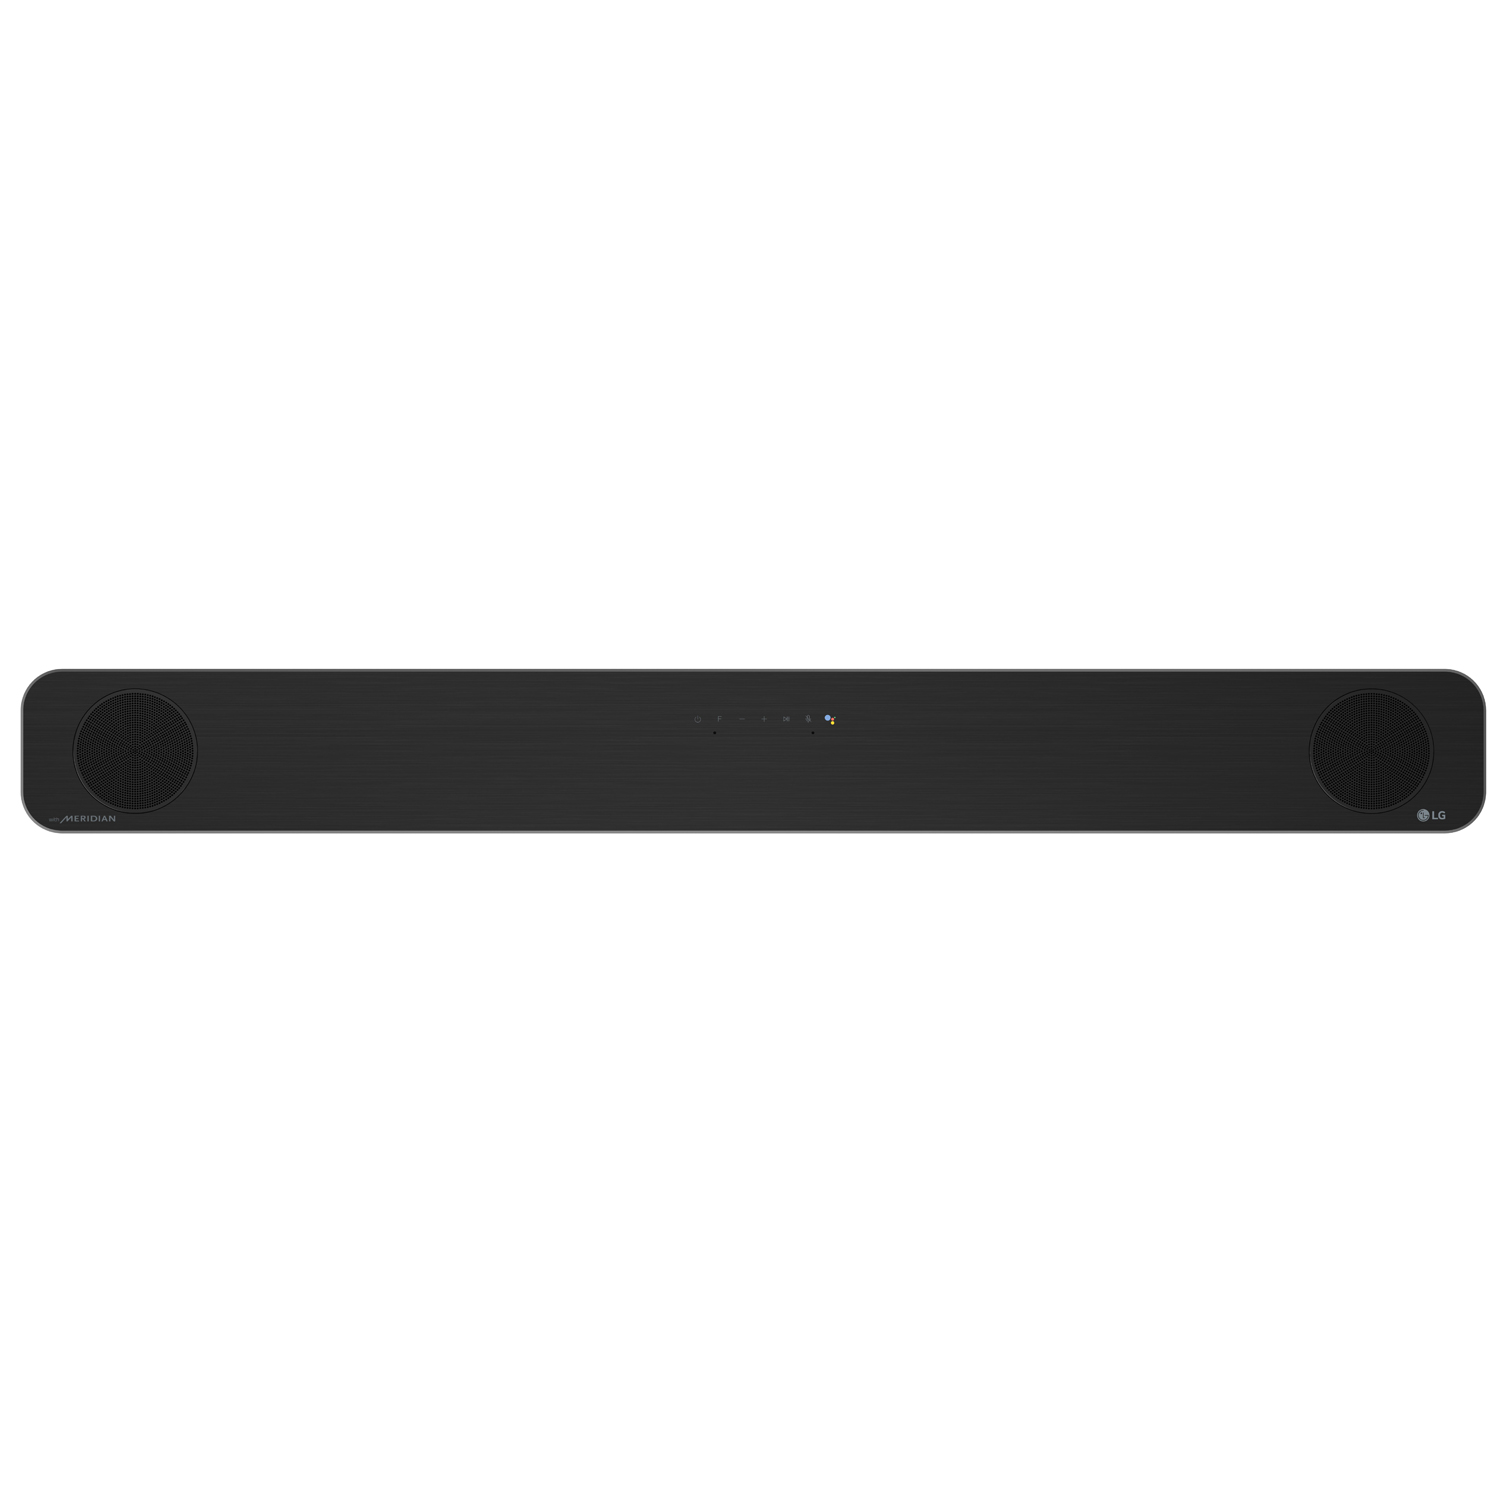 LG SN8YG 3.1.2ch Sound Bar w/ Meridian, Dolby Atmos, DTS:X 3D Surround Sound + Wireless Subwoofer Bundle with 2x Deco Gear HDMI Cable + 1 Year Extended Coverage + Streaming Entertainment Software Kit - image 3 of 10